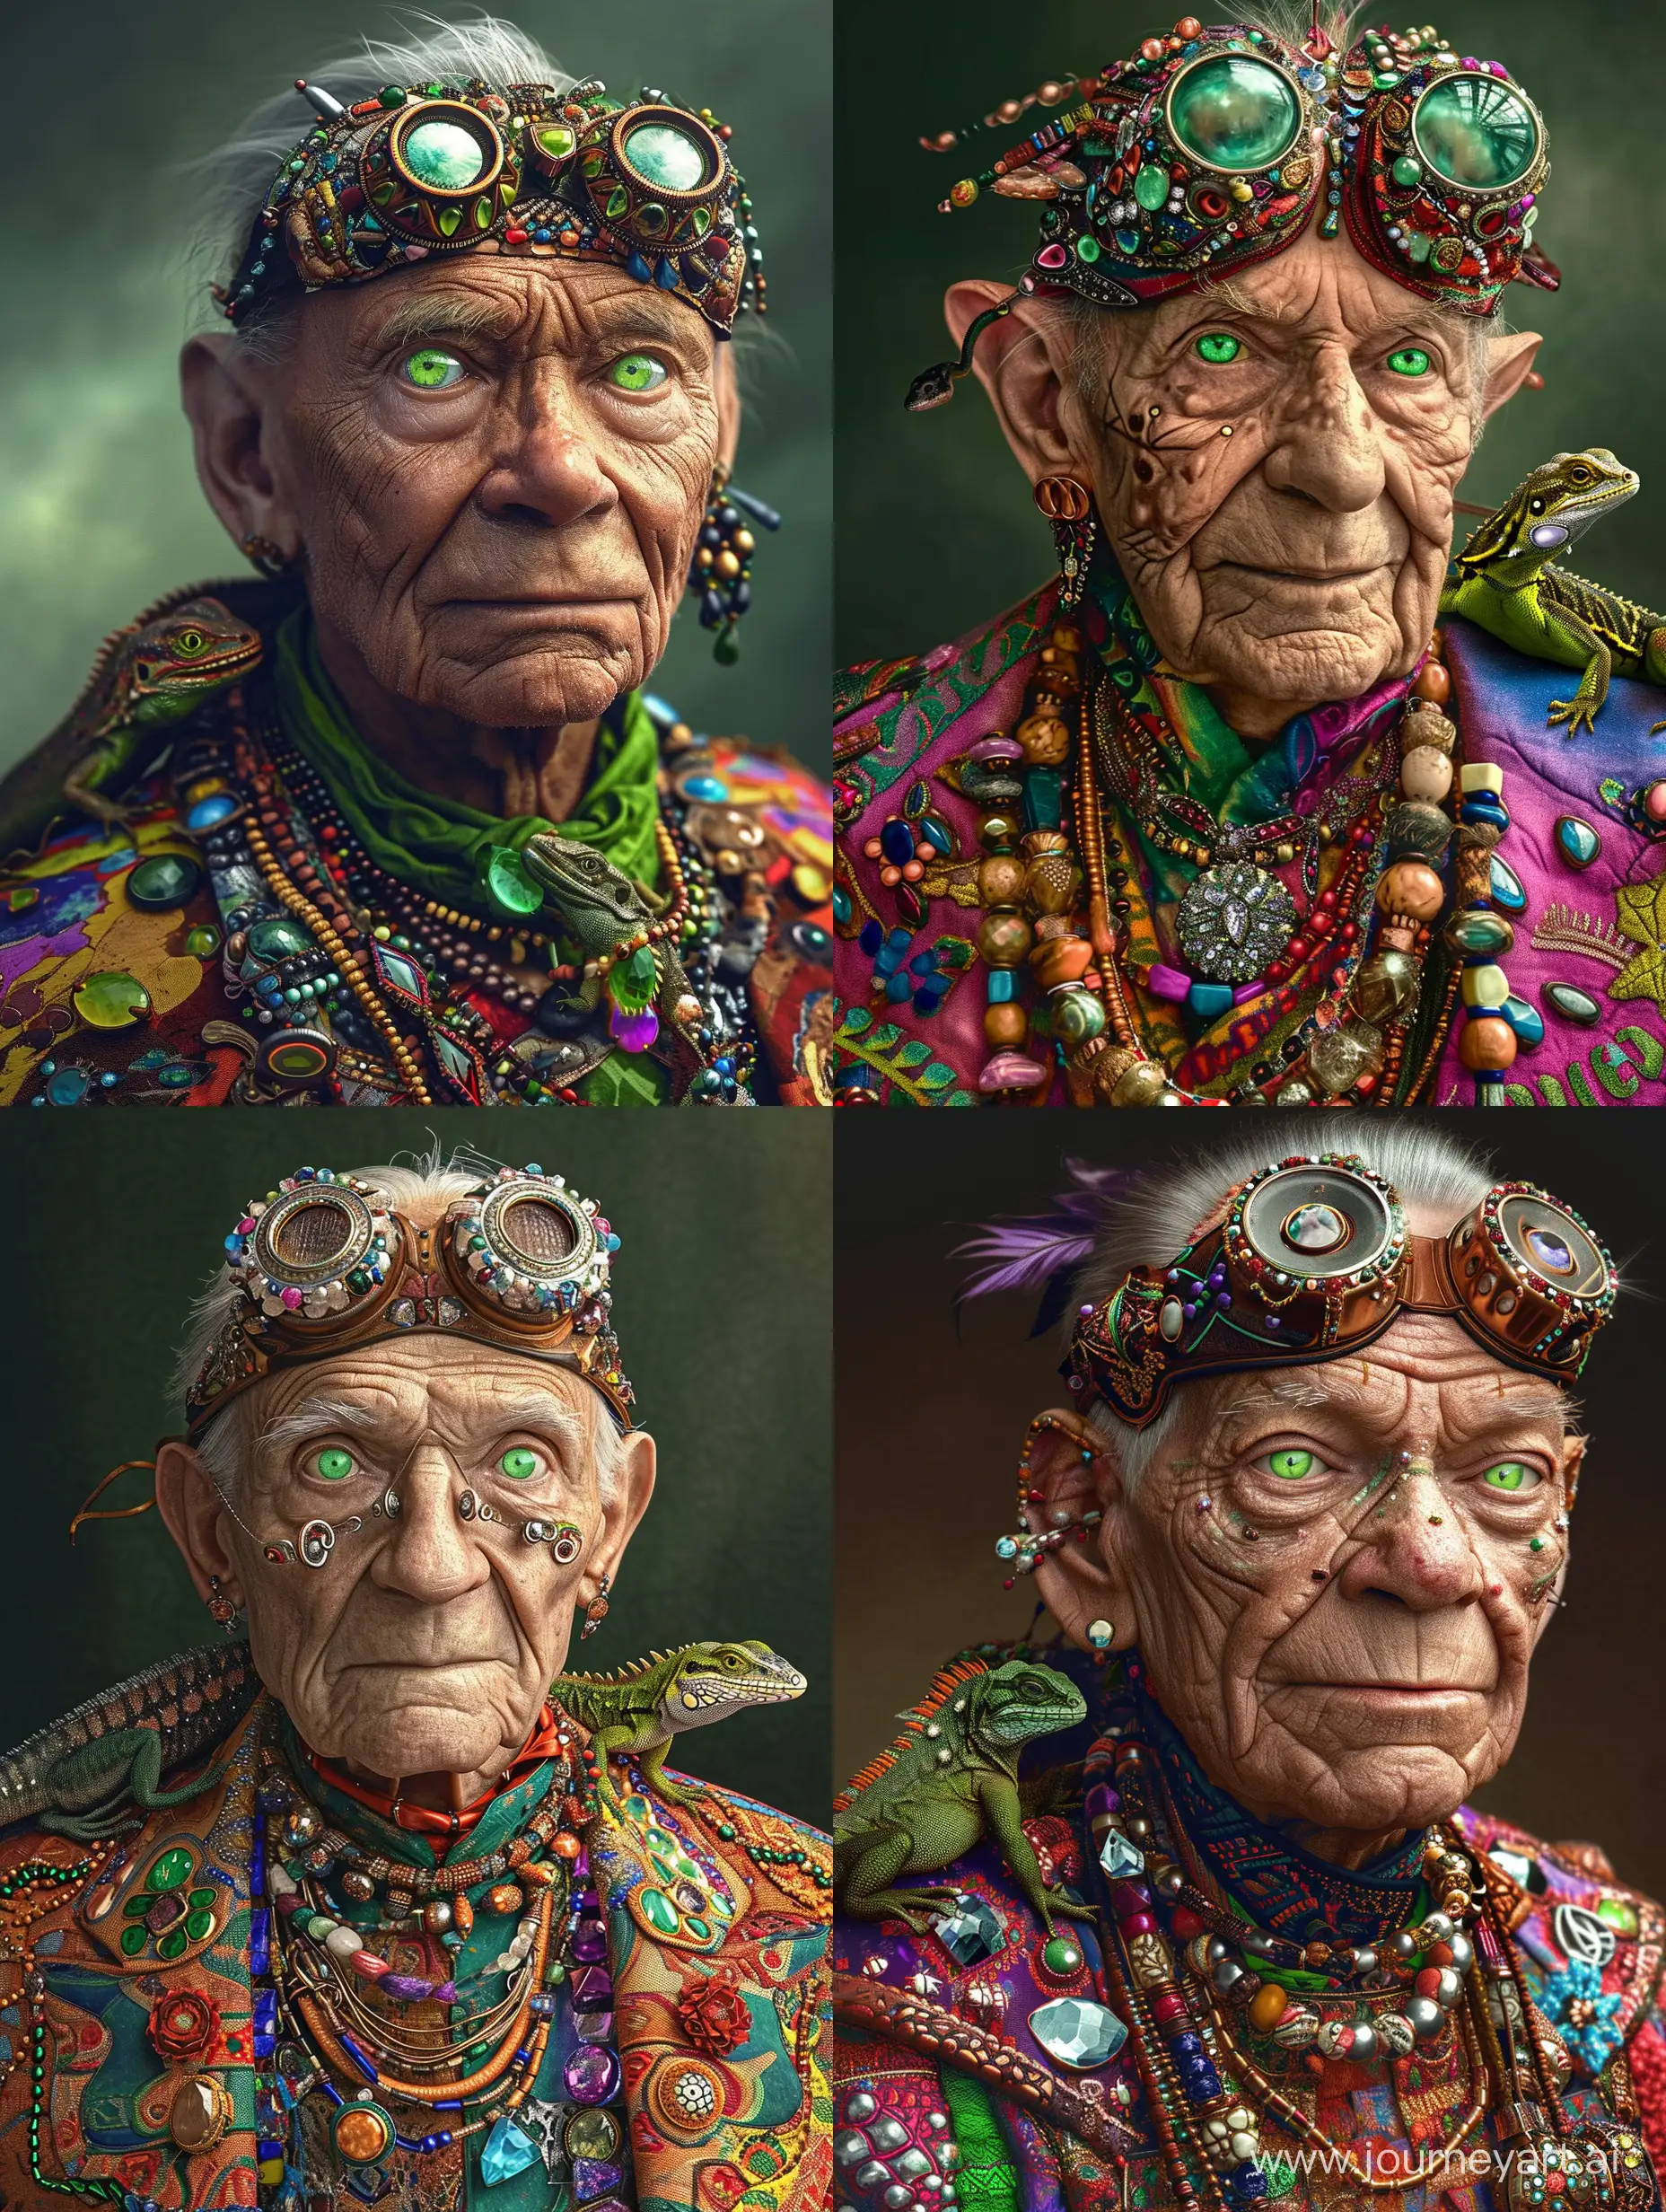 An older man with green eyes and a colorful suit adorned with gemstones and beads. He wears ornate goggles and has a lizard perched on his shoulder.